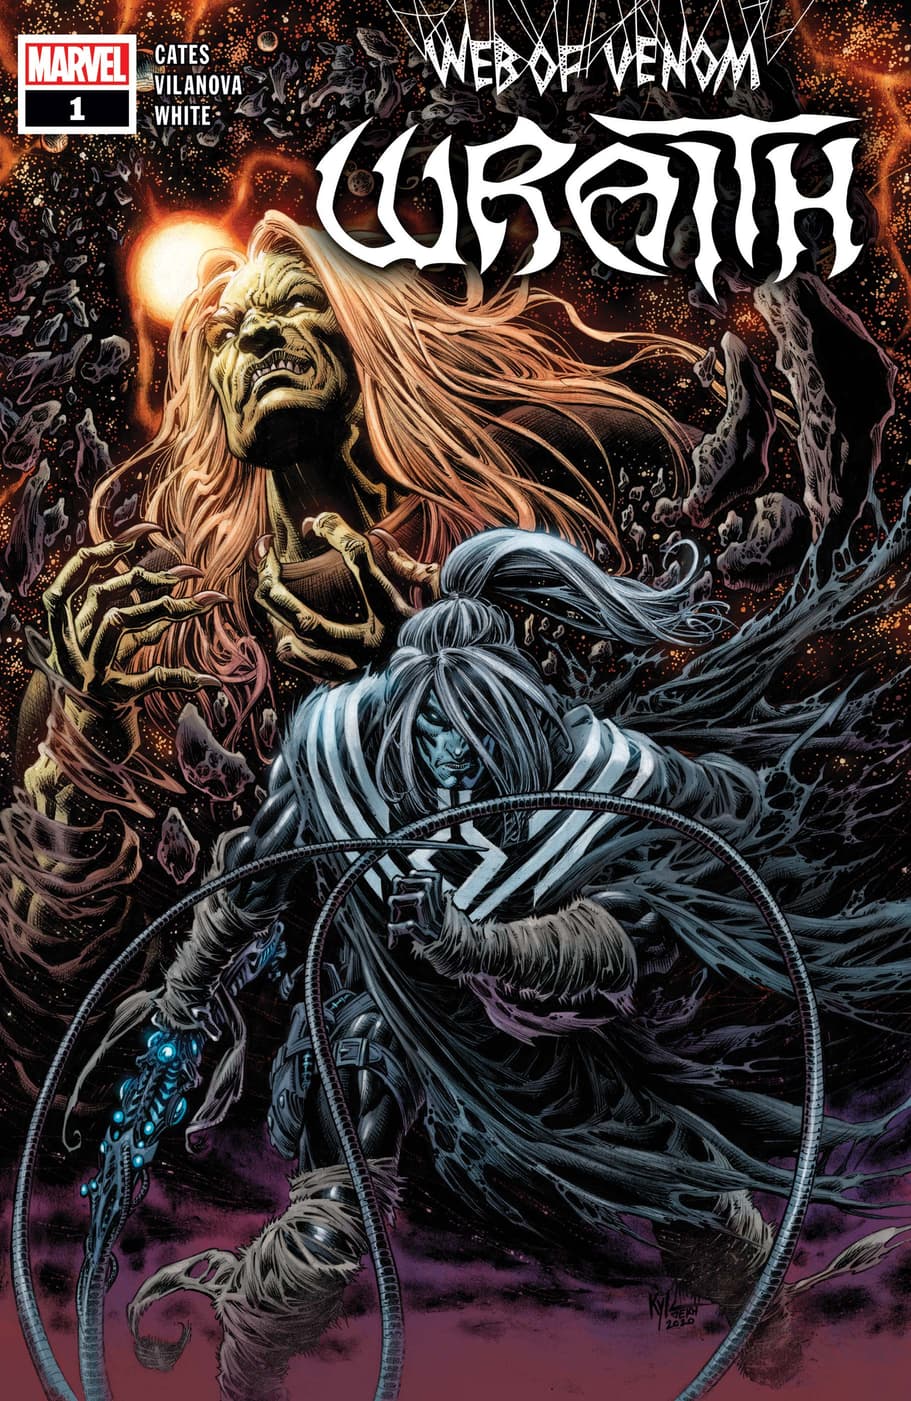 WEB OF VENOM: WRAITH #1 cover by Kyle Hotz and Dan Brown